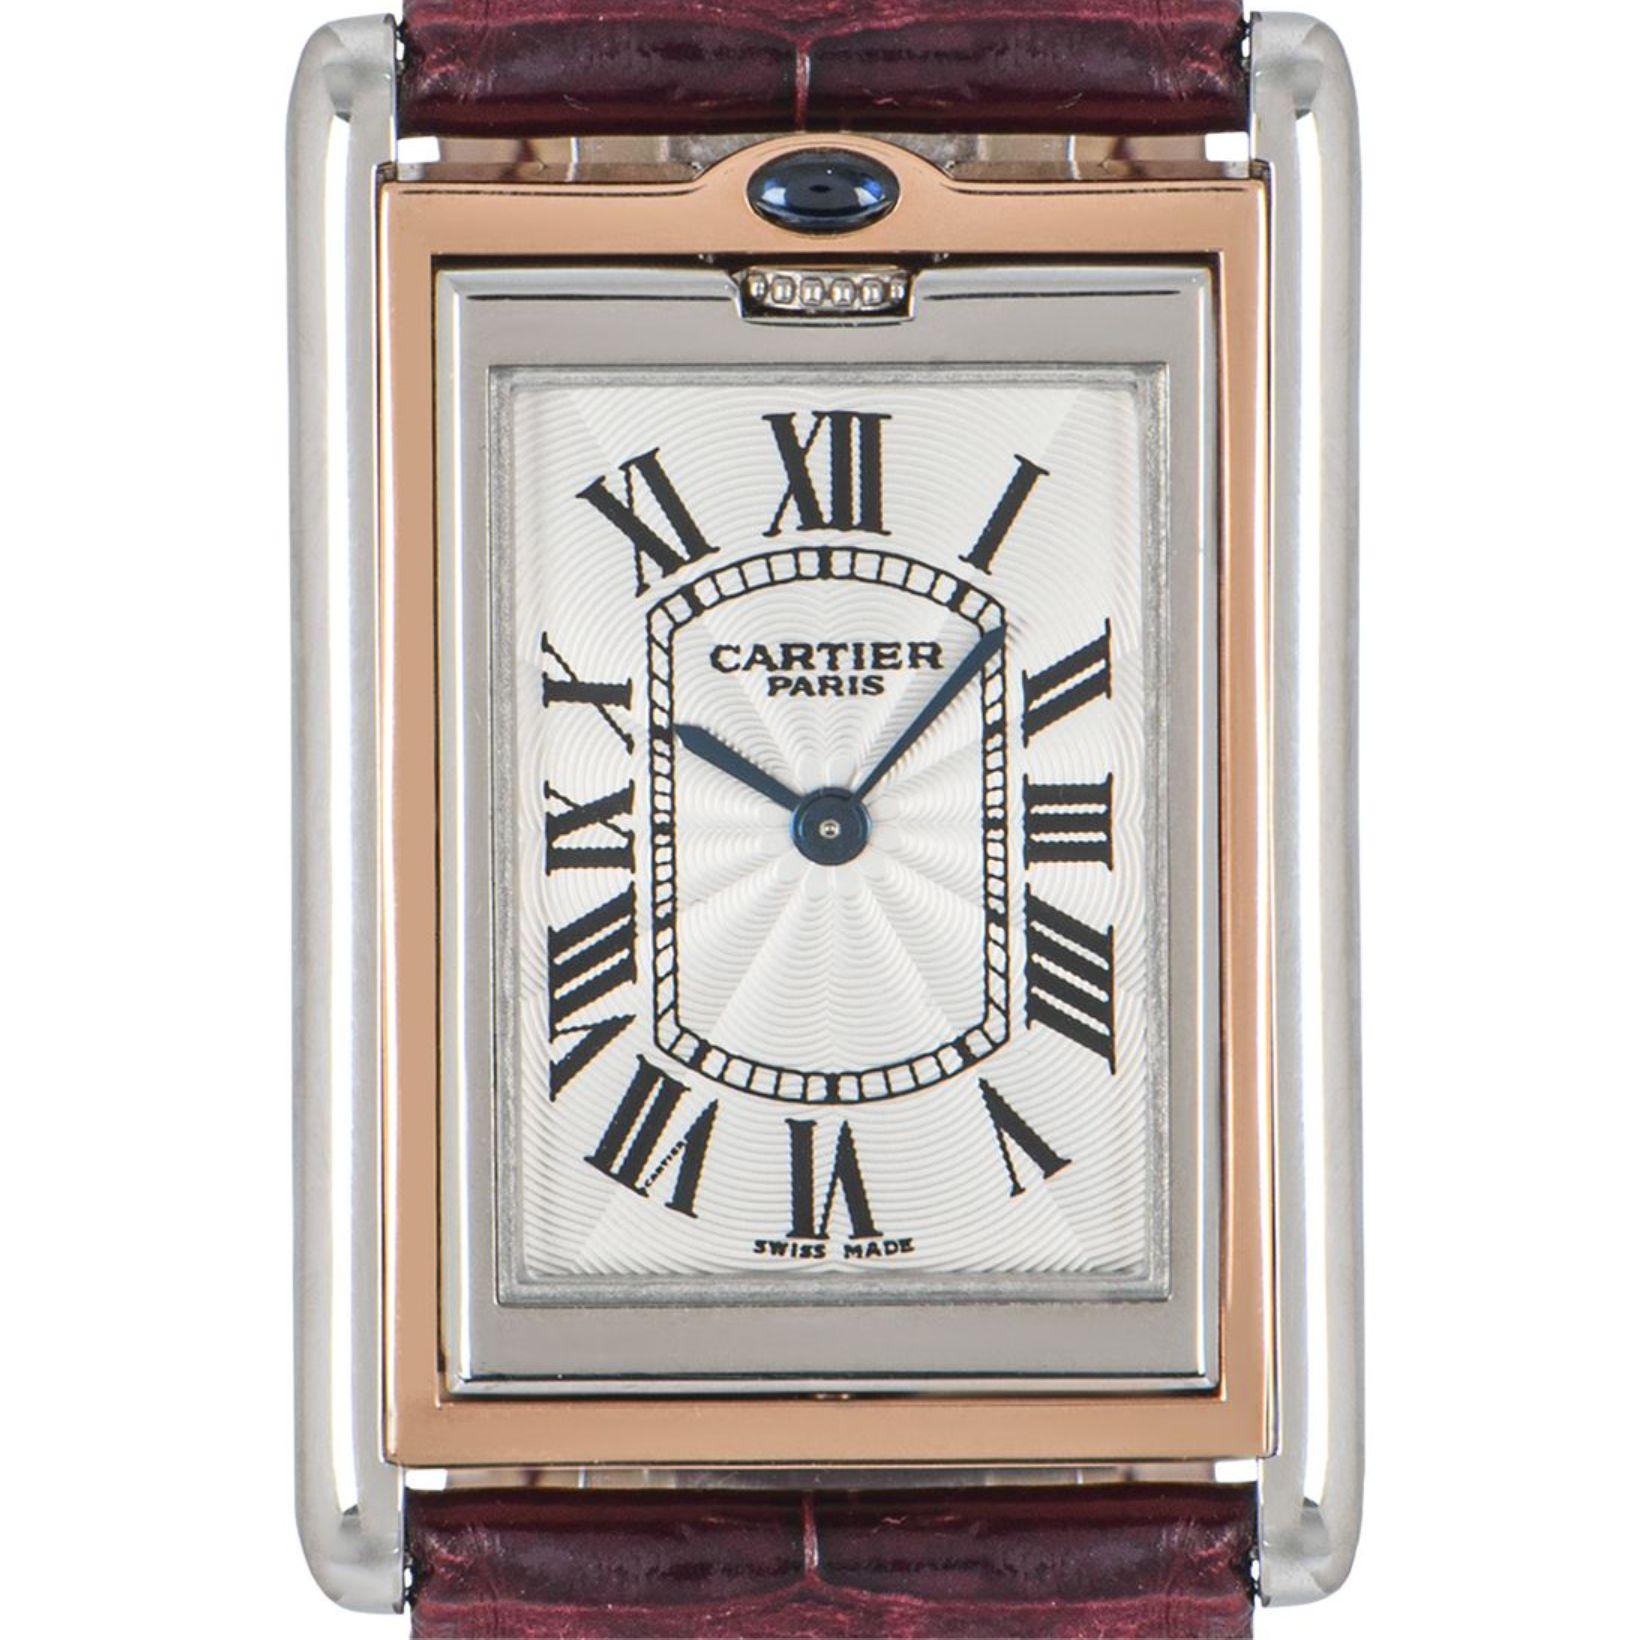 A rare, platinum and rose gold Tank Basculante by Cartier. Featuring a silver guilloche dial with roman numerals, blued steel sword-shaped hands, a hidden Cartier signature at VII and a reversible case featuring an exhibition case back.

Fitted with